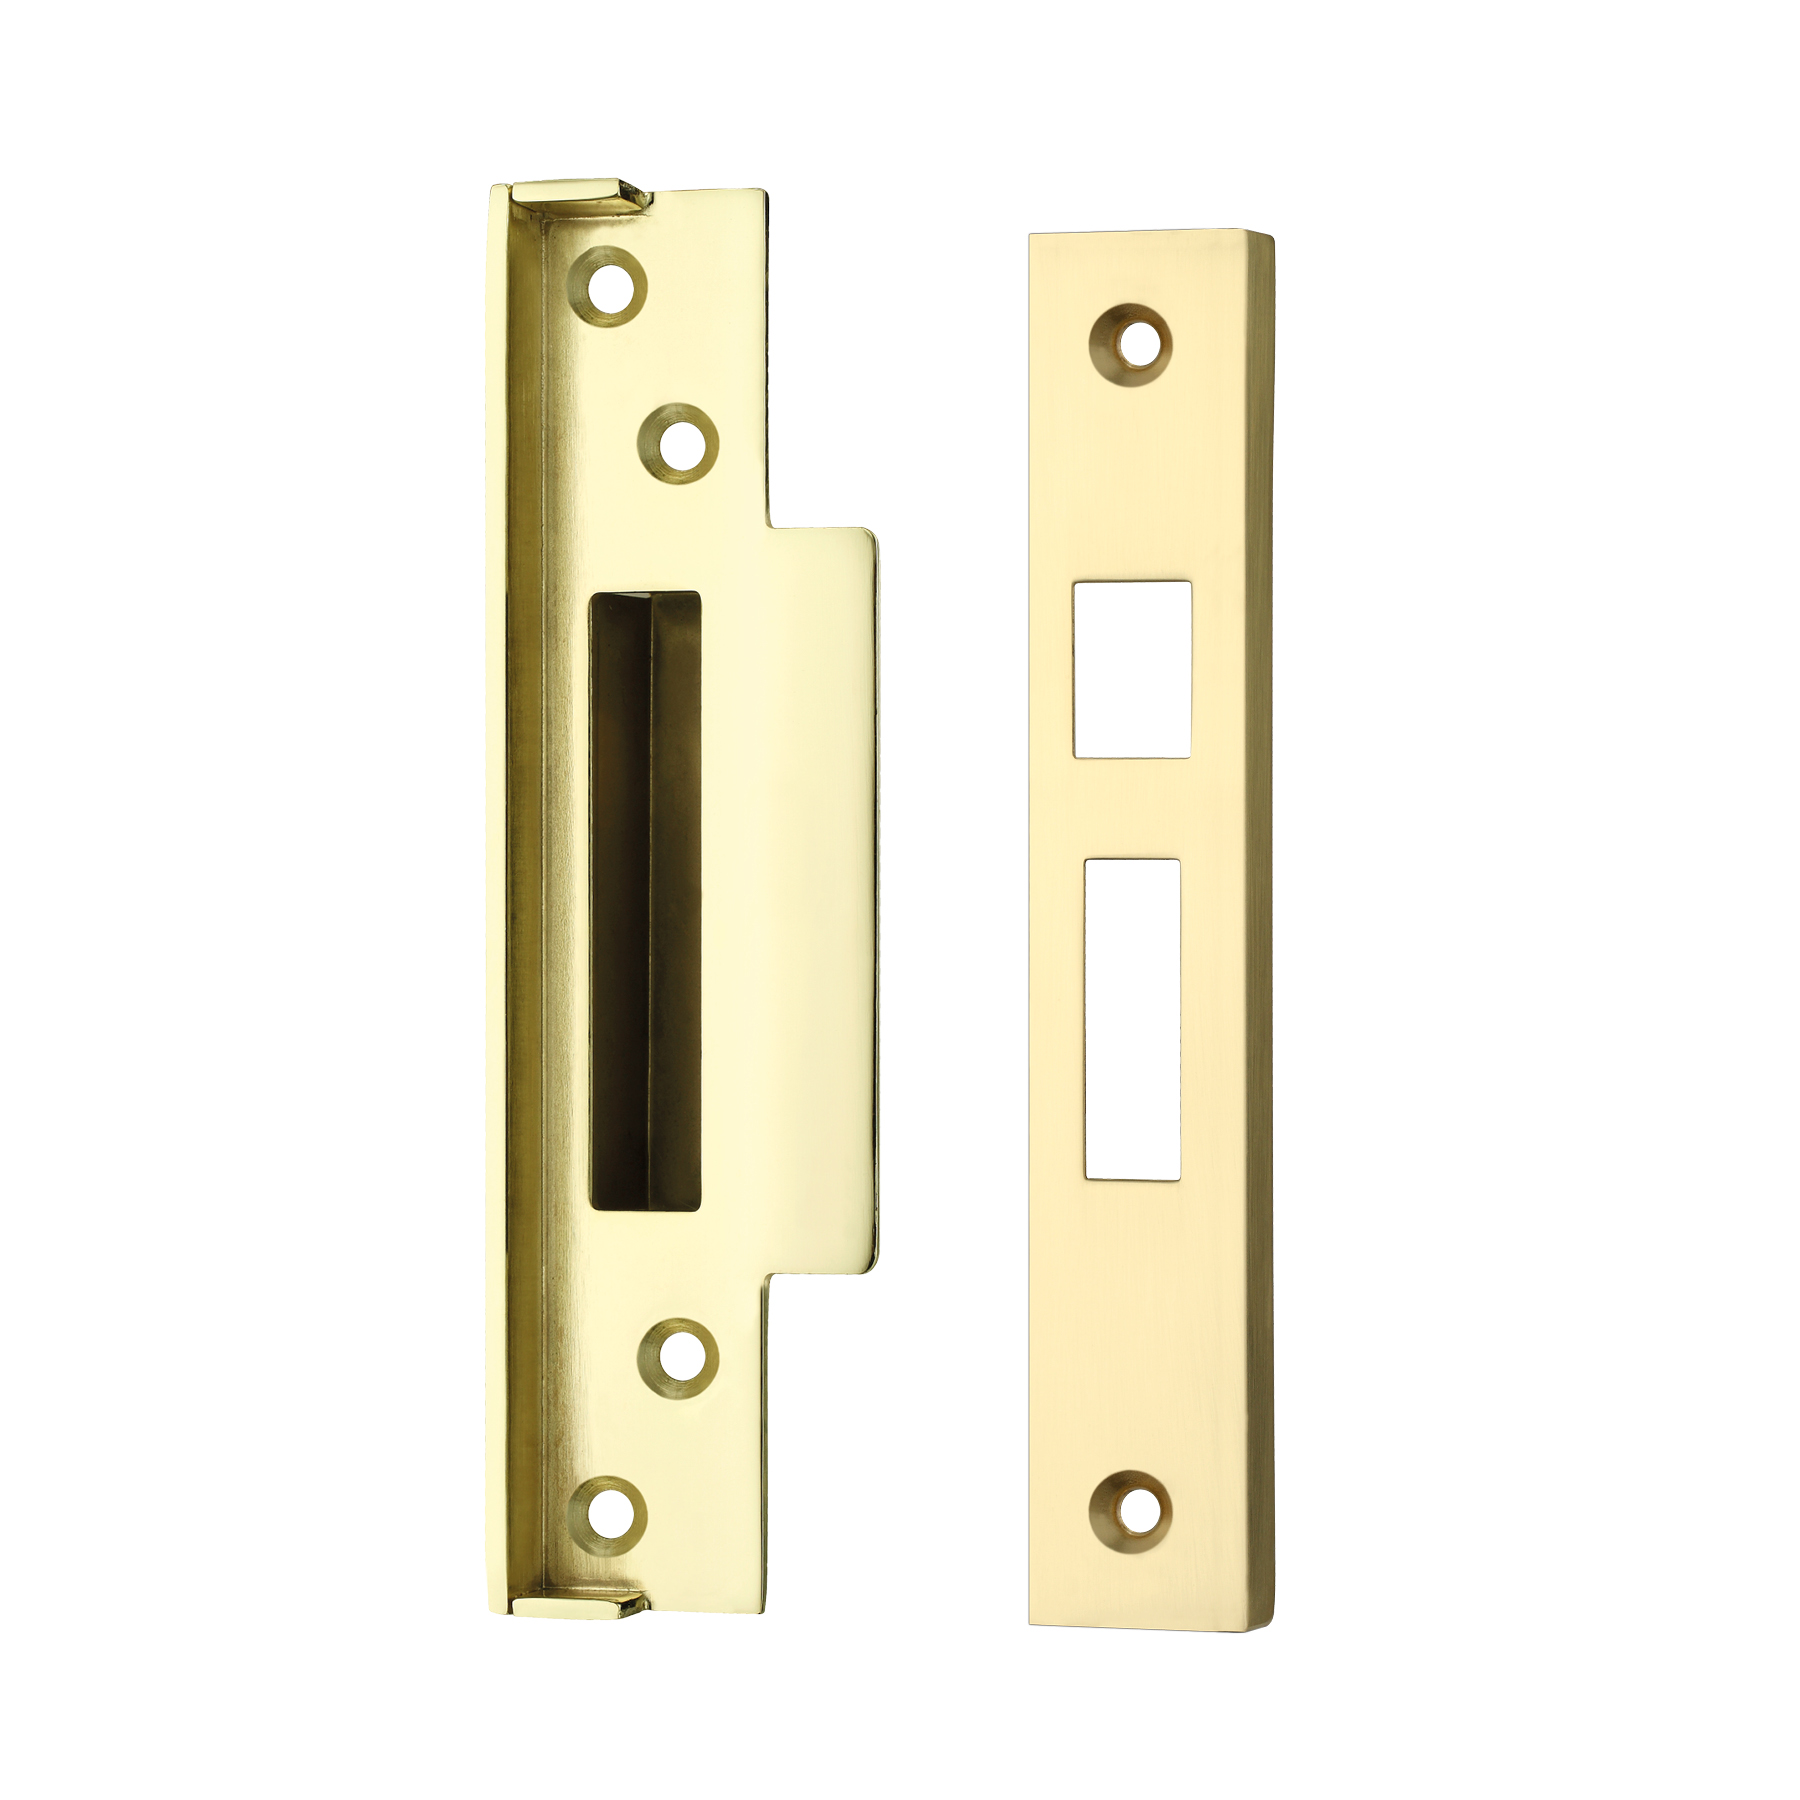 Rebate Kit to suit BS 5 Lever Sash Locks - suitable for 64mm and 76mm - contains right and left rebate and sash strike